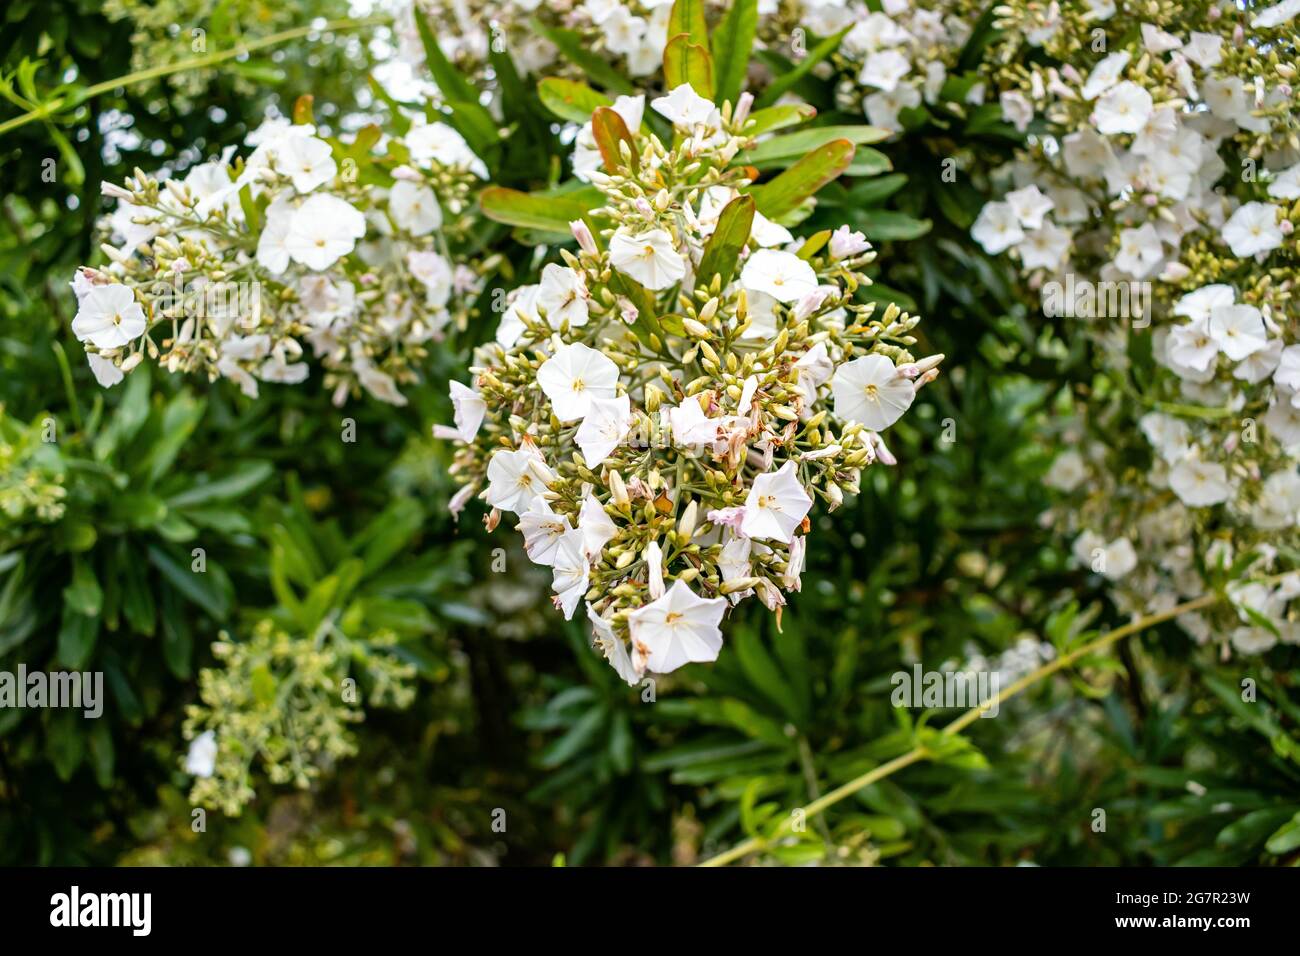 Blooming mountain laurel flowers in the gard Stock Photo